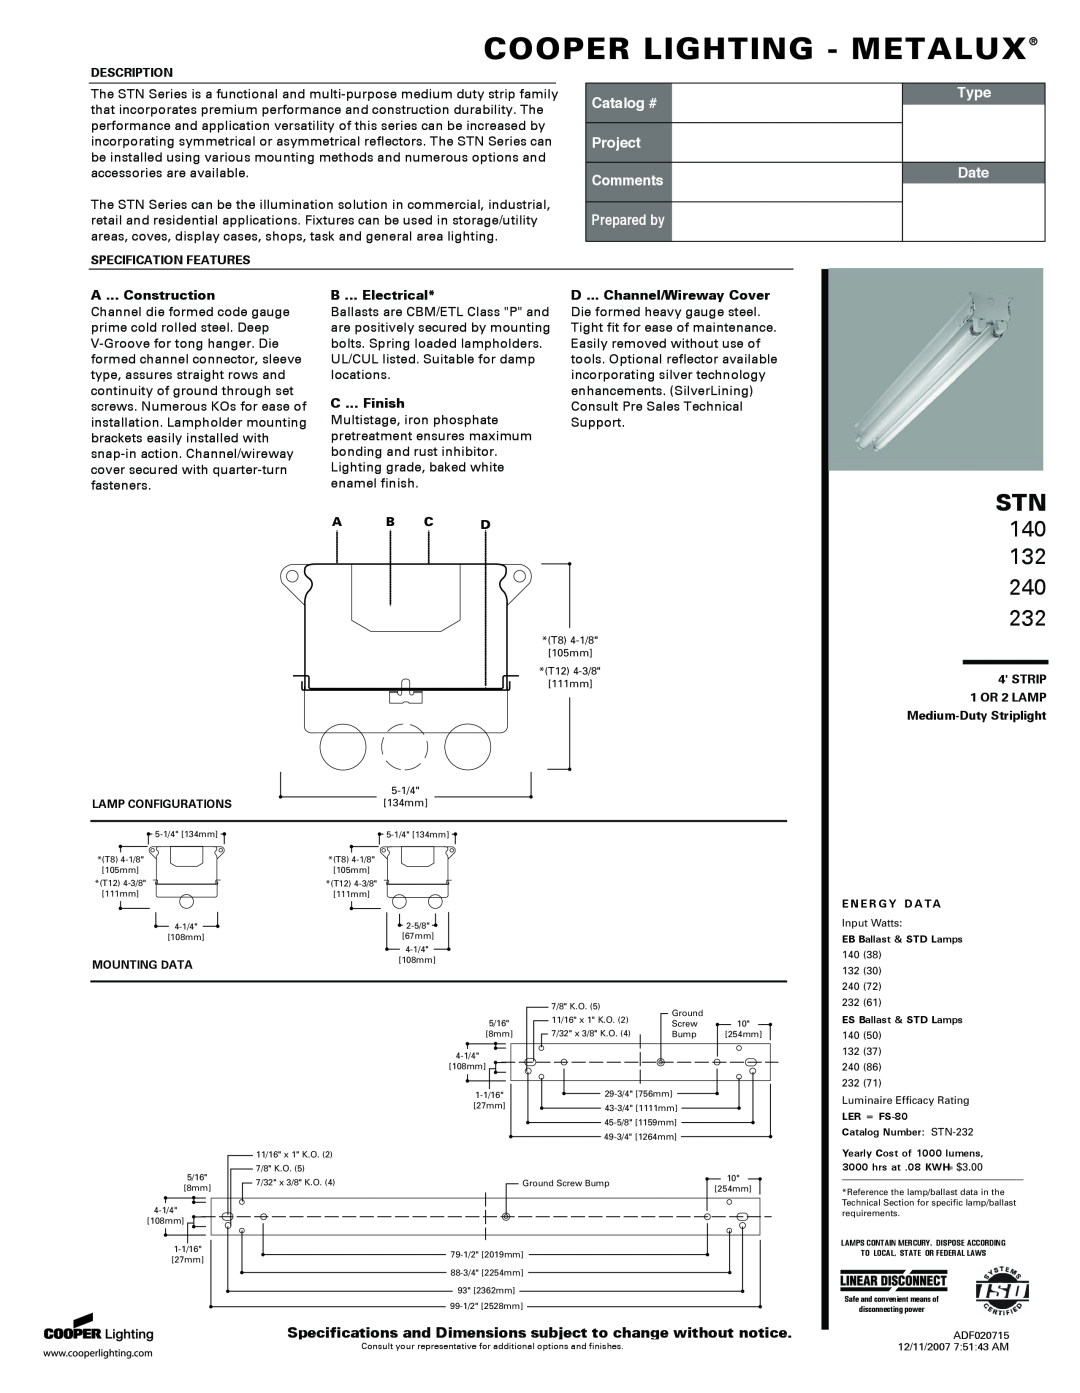 Cooper Lighting 232 specifications Cooper Lighting - Metalux, 140, Catalog #, Project Comments, Prepared by, Type, Date 